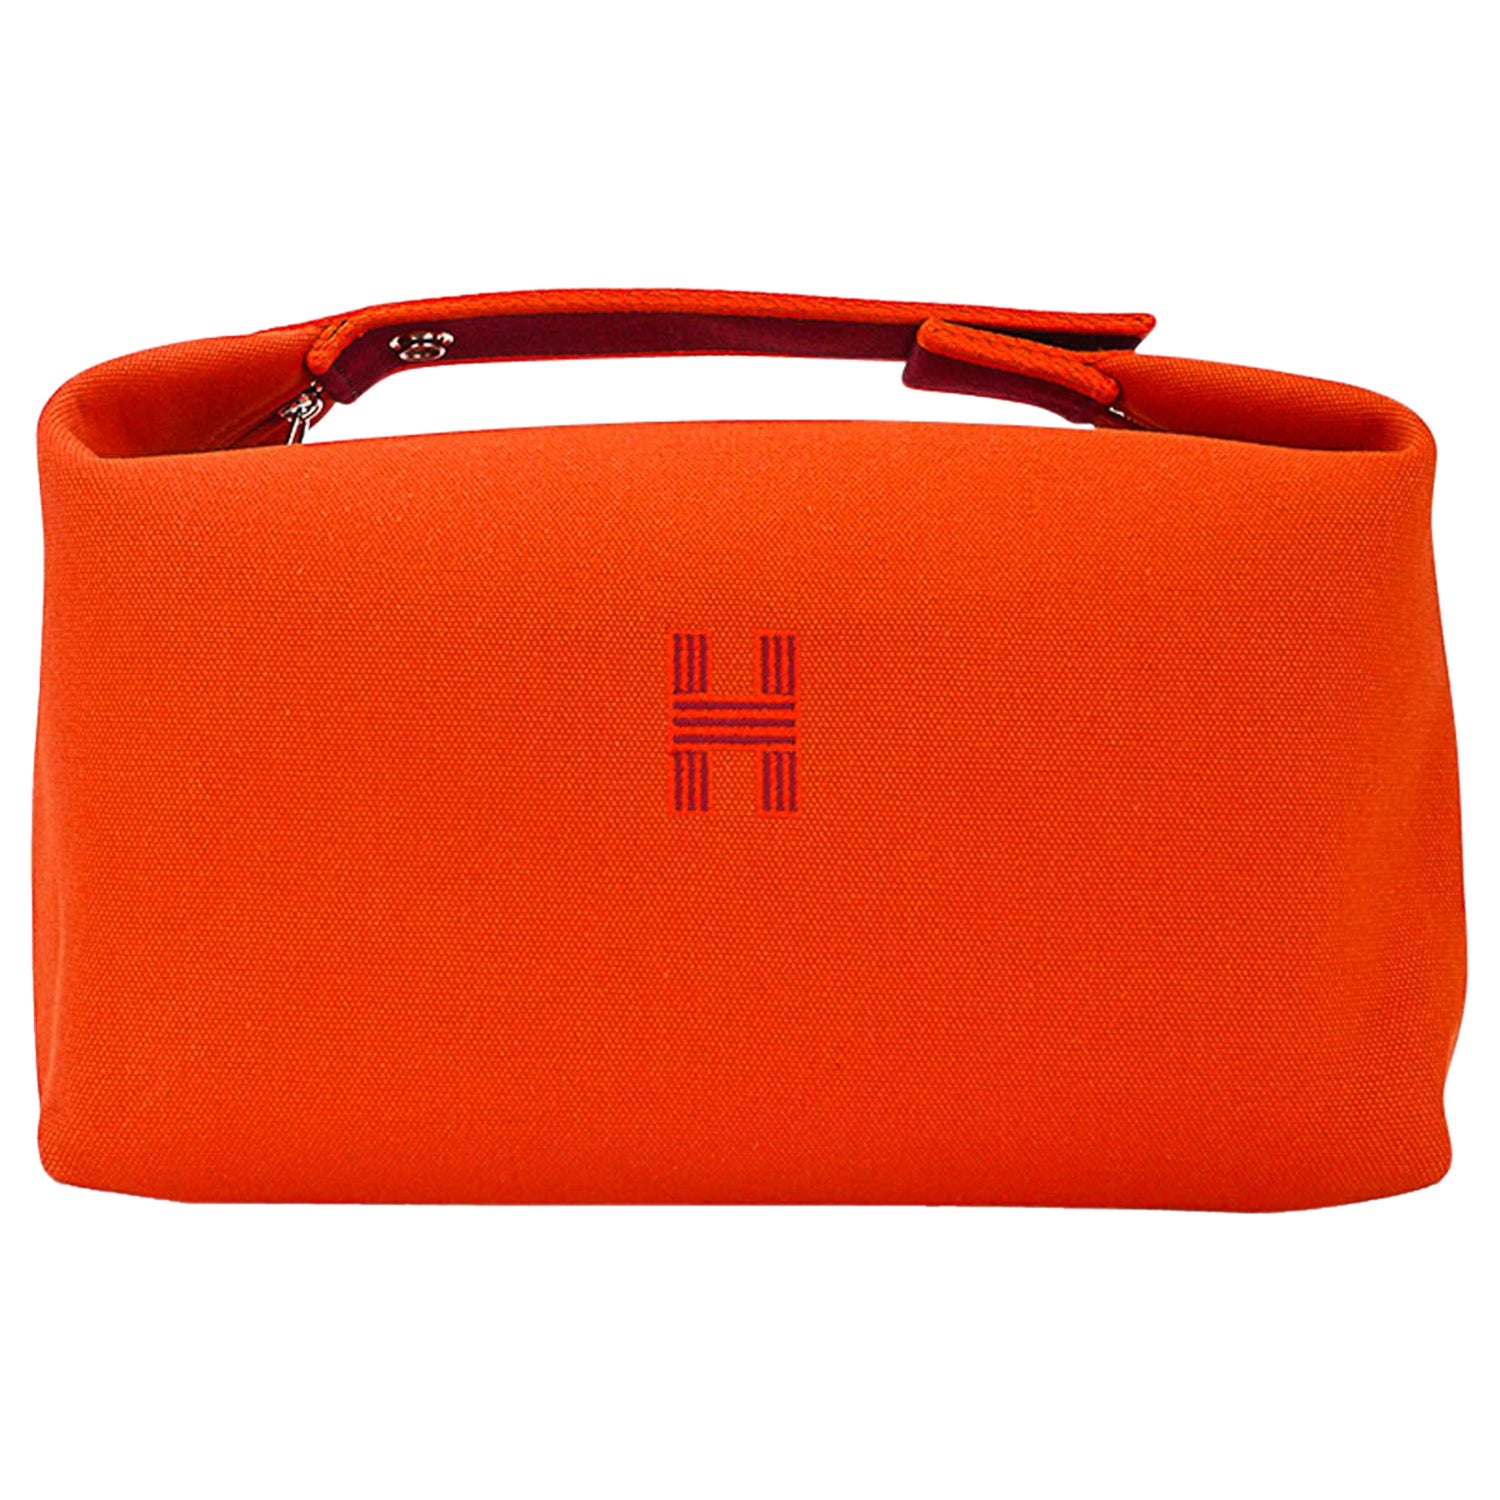 Hermes Bride A Brac Small, Beige and Orange, Preowned in Dustbag WA001